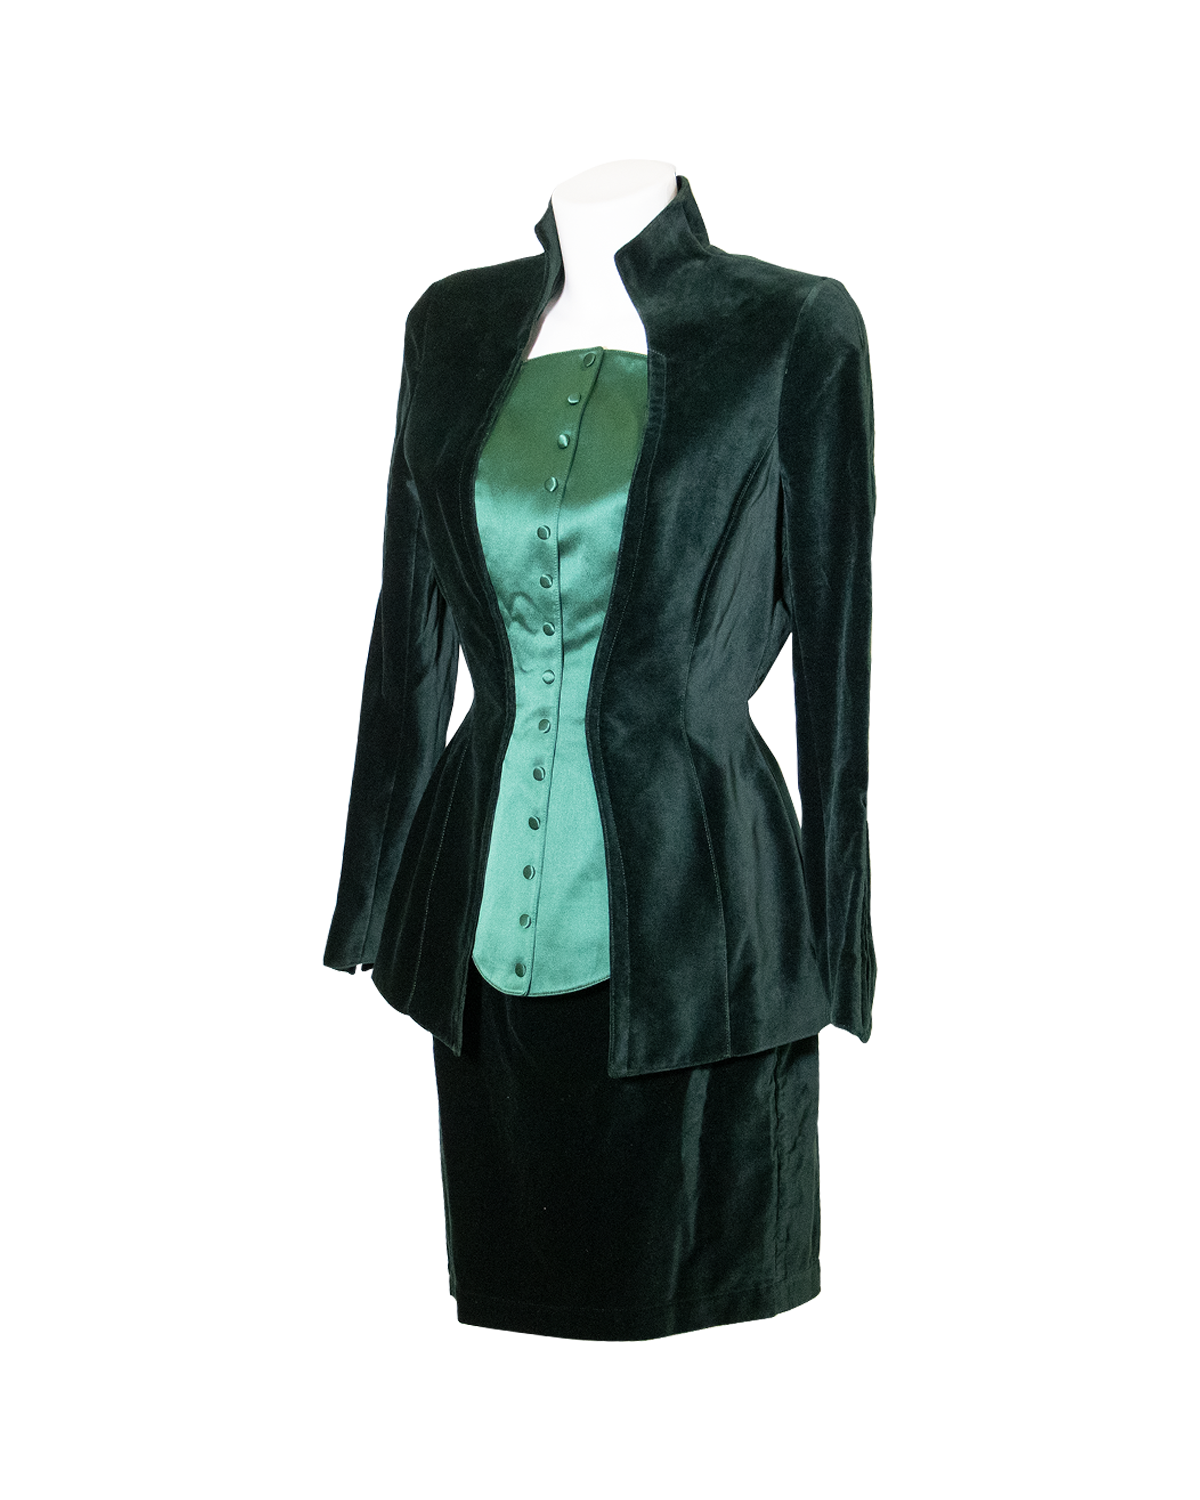 Thierry Mugler - Green suit from 1980s